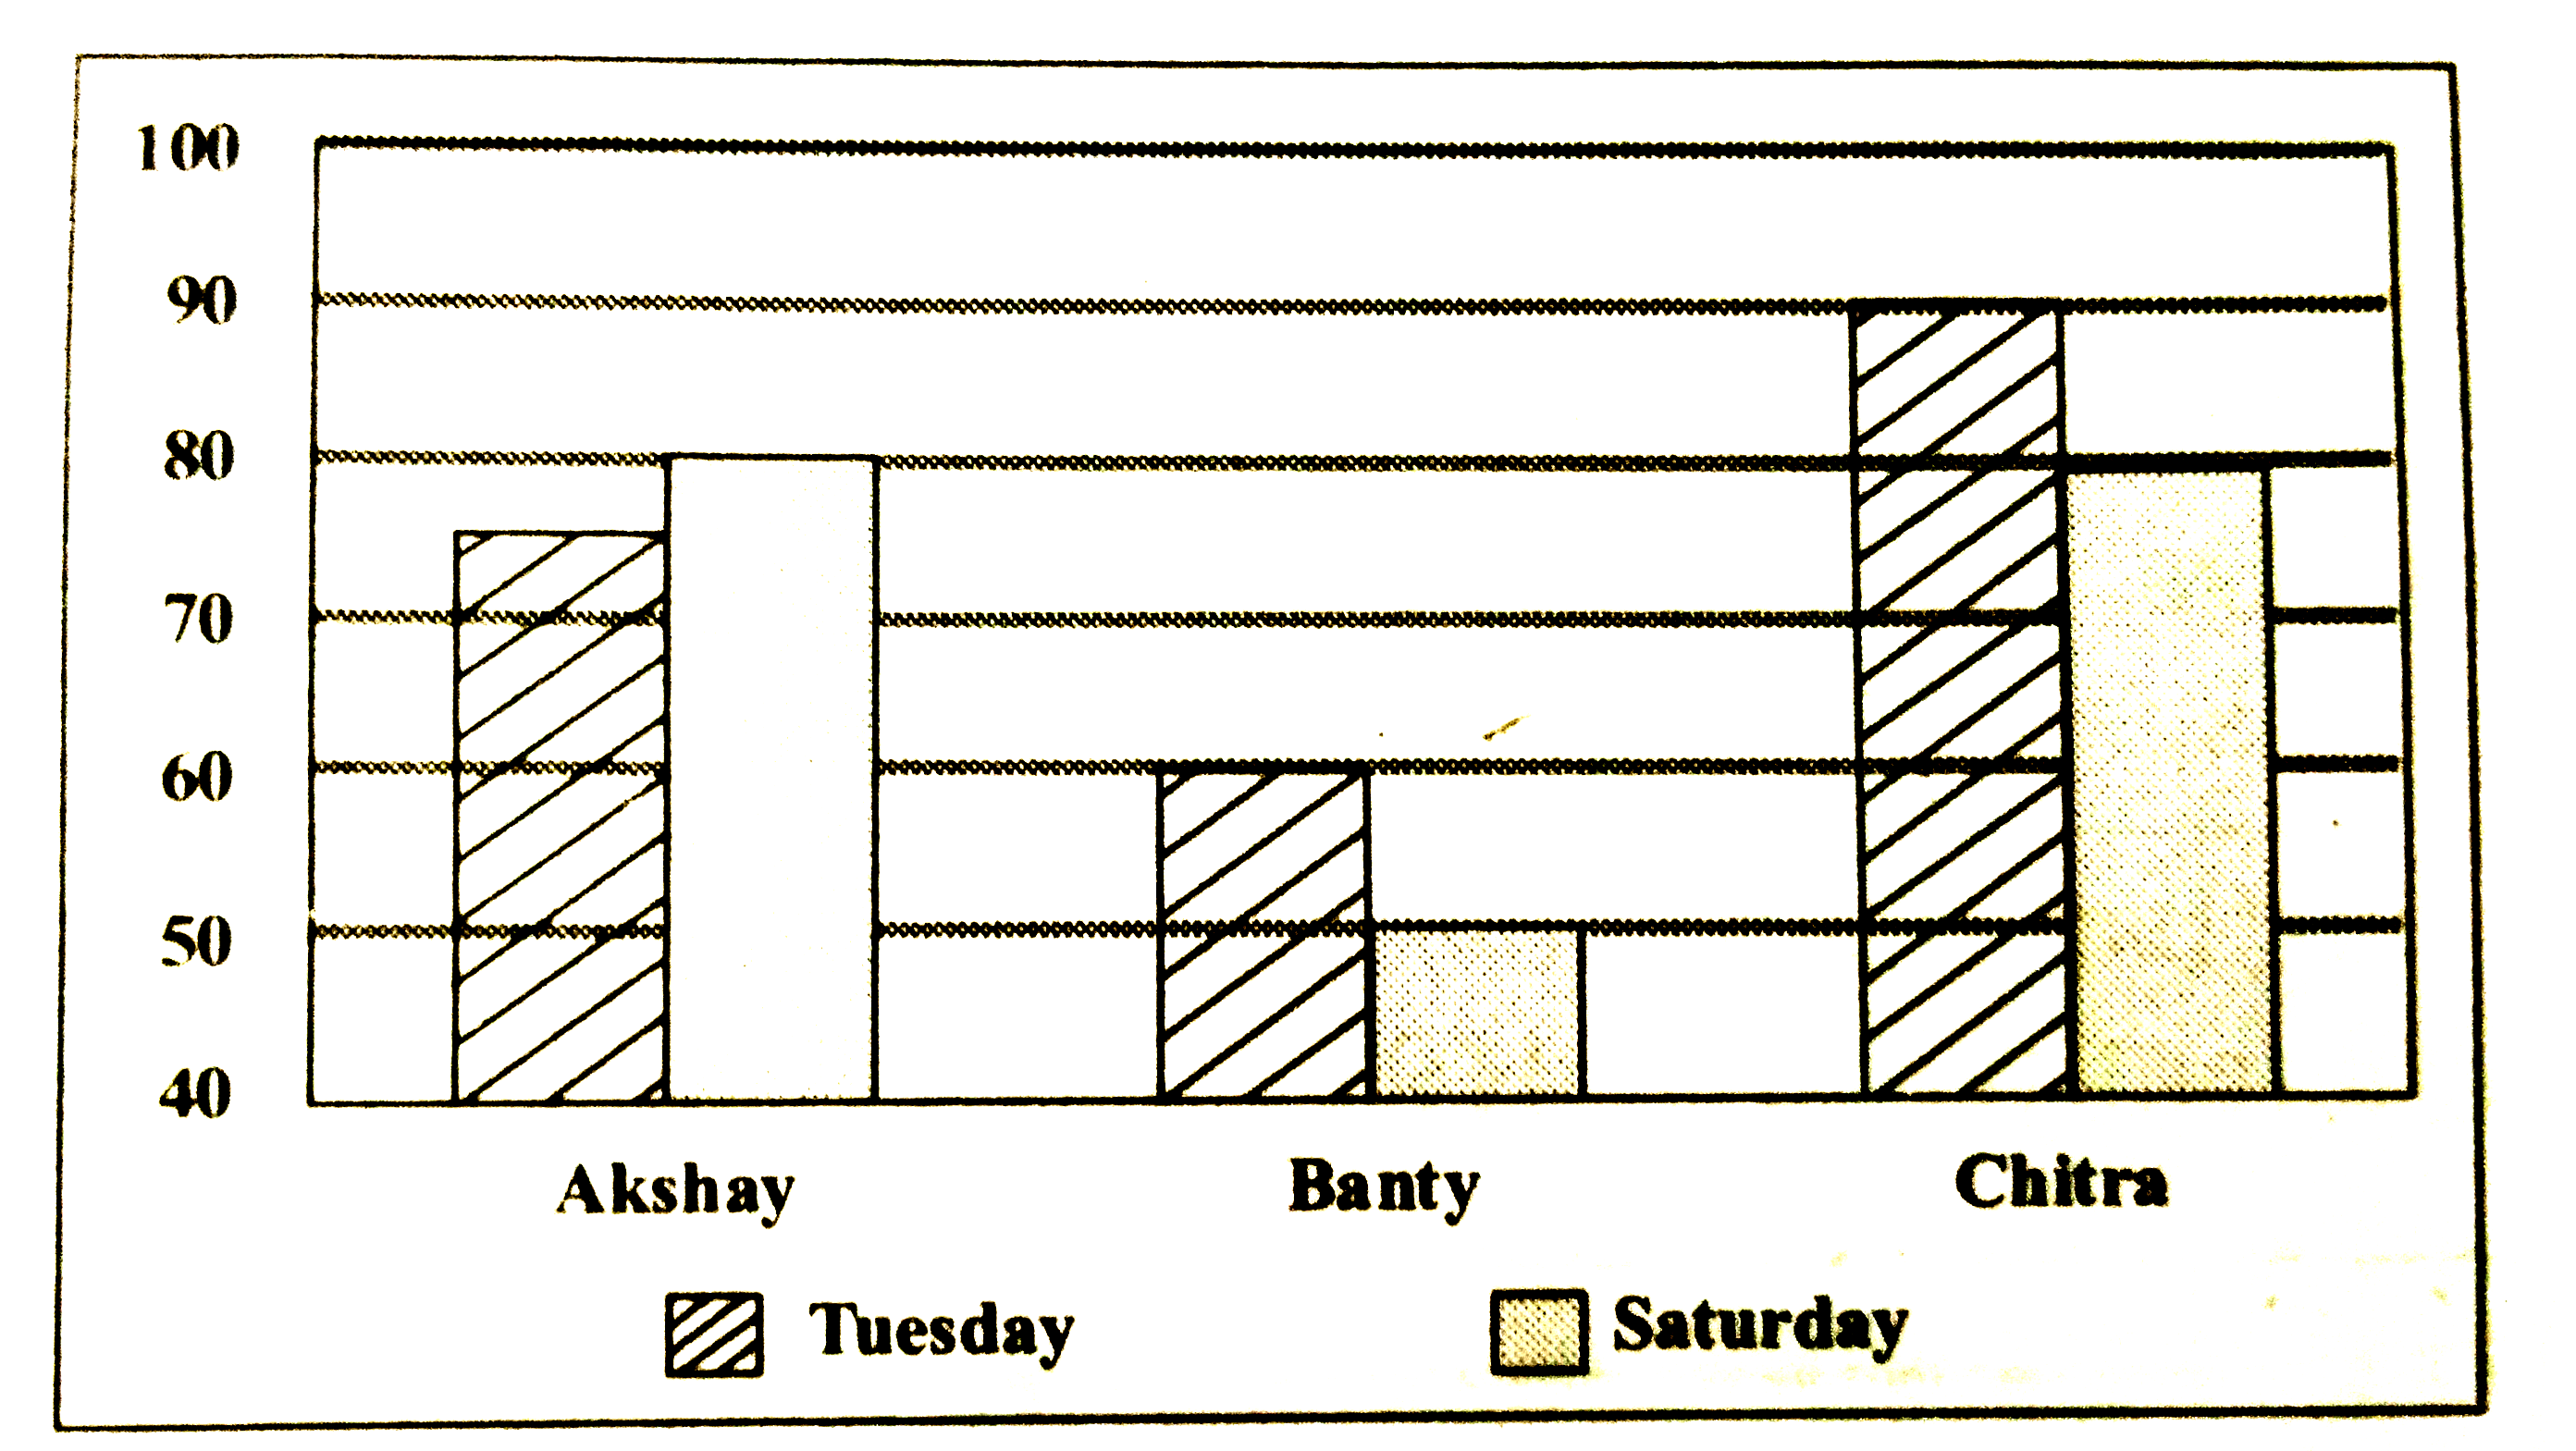 No. of query resolved by Akshay and Chitra on Saturday is 540. What could be maximum number of calls that were not resolved by Aksay on Saturday ?